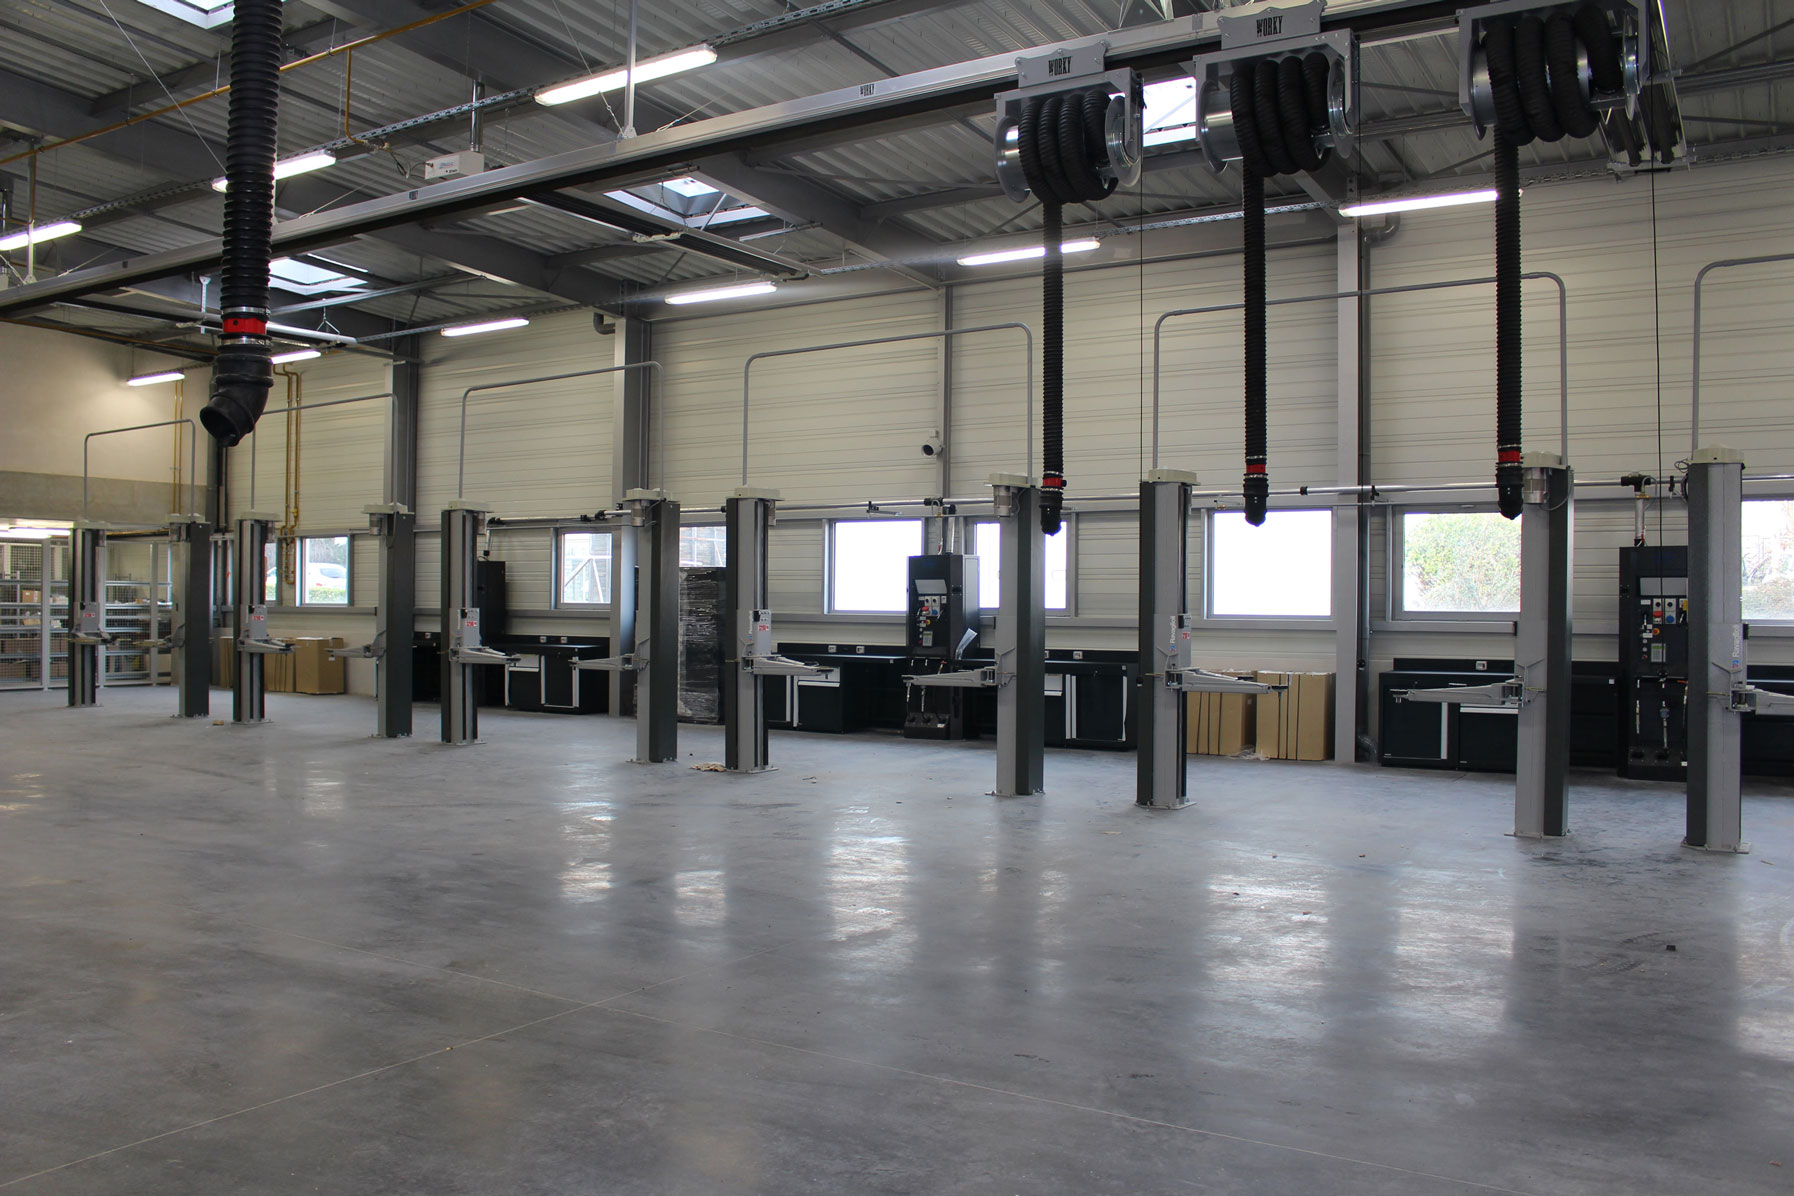 Workshop equipped with numerous grey two-post lifts set up in a row